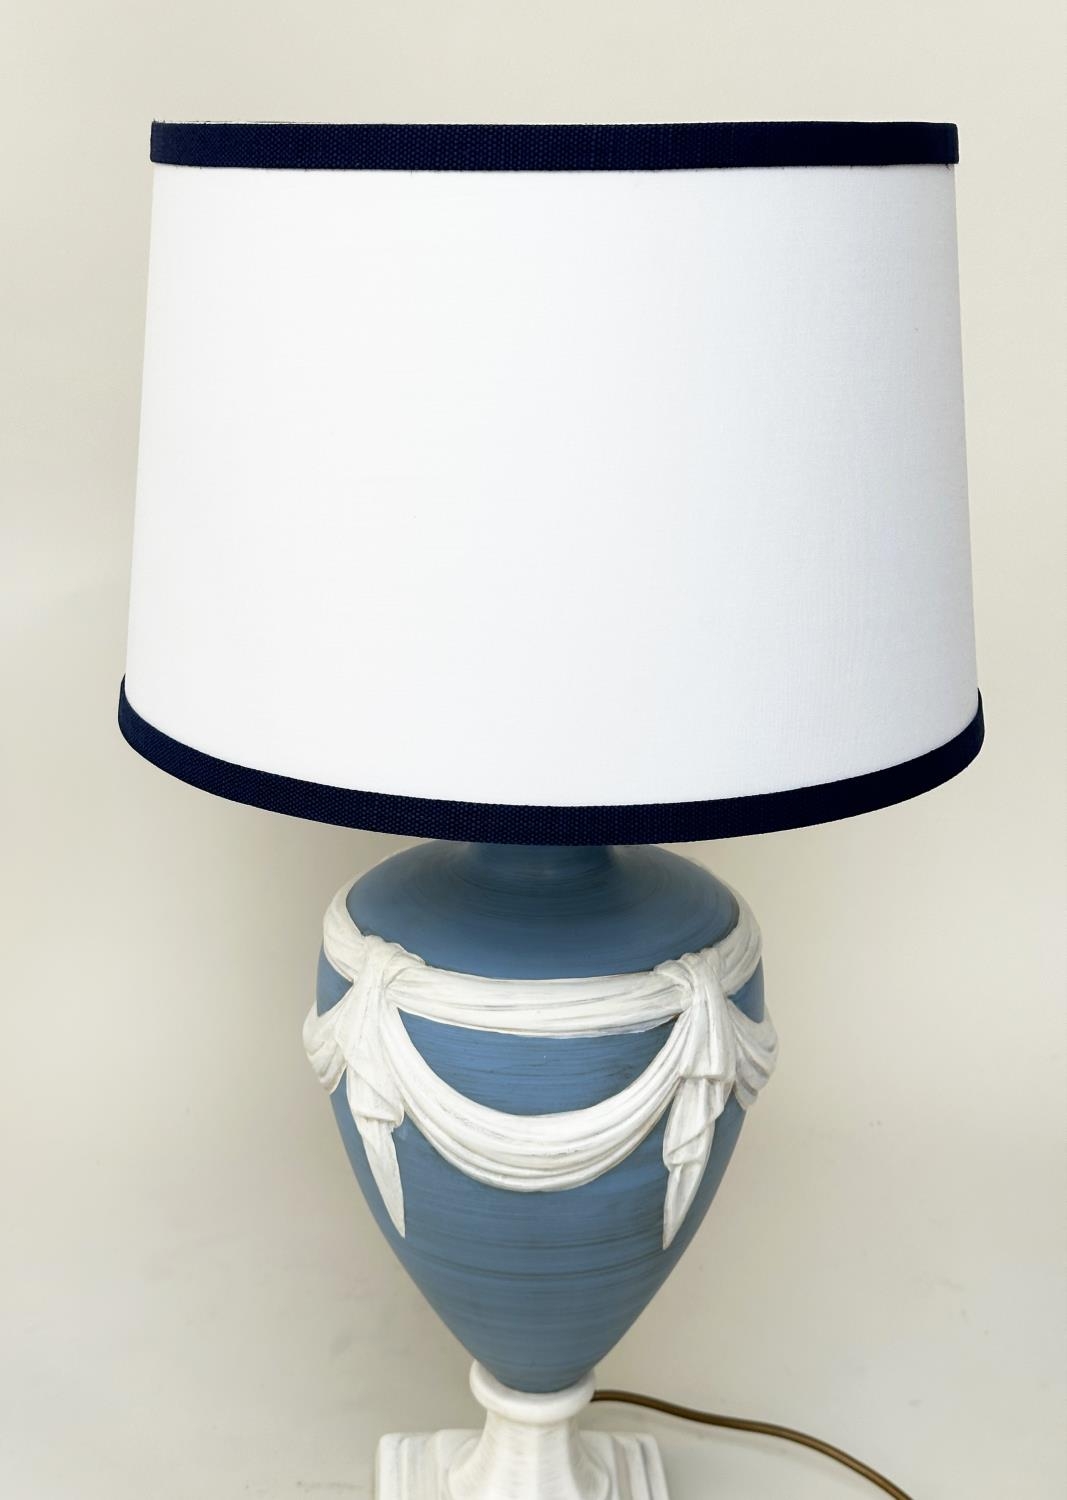 TABLE LAMPS, a pair, Wedgwood jasperware style of vase form with shades, 70cm H. - Image 11 of 12